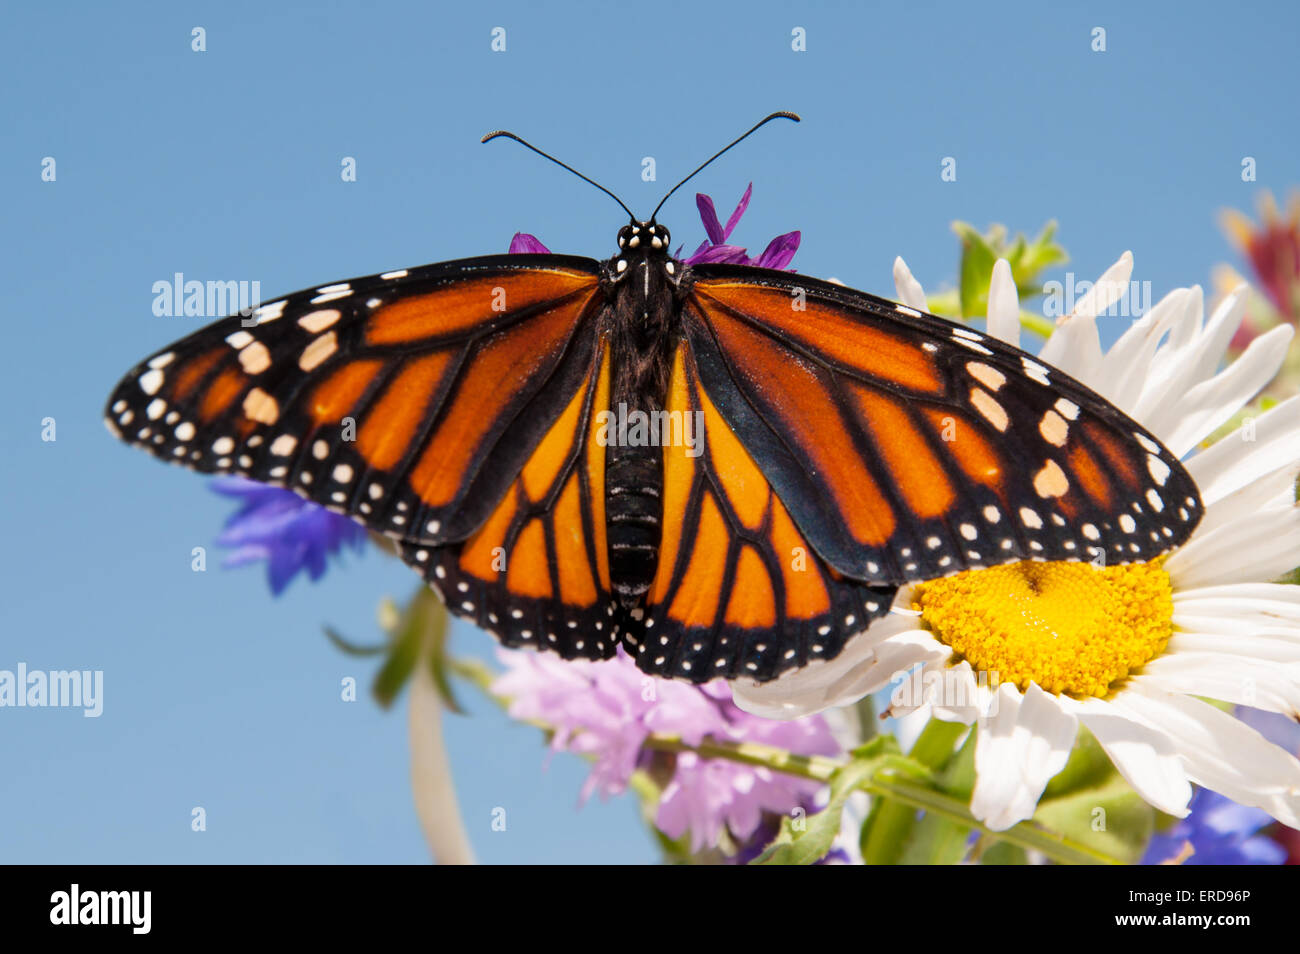 Colorful orange and black Monarch butterfly on summer flowers against clear blue sky Stock Photo